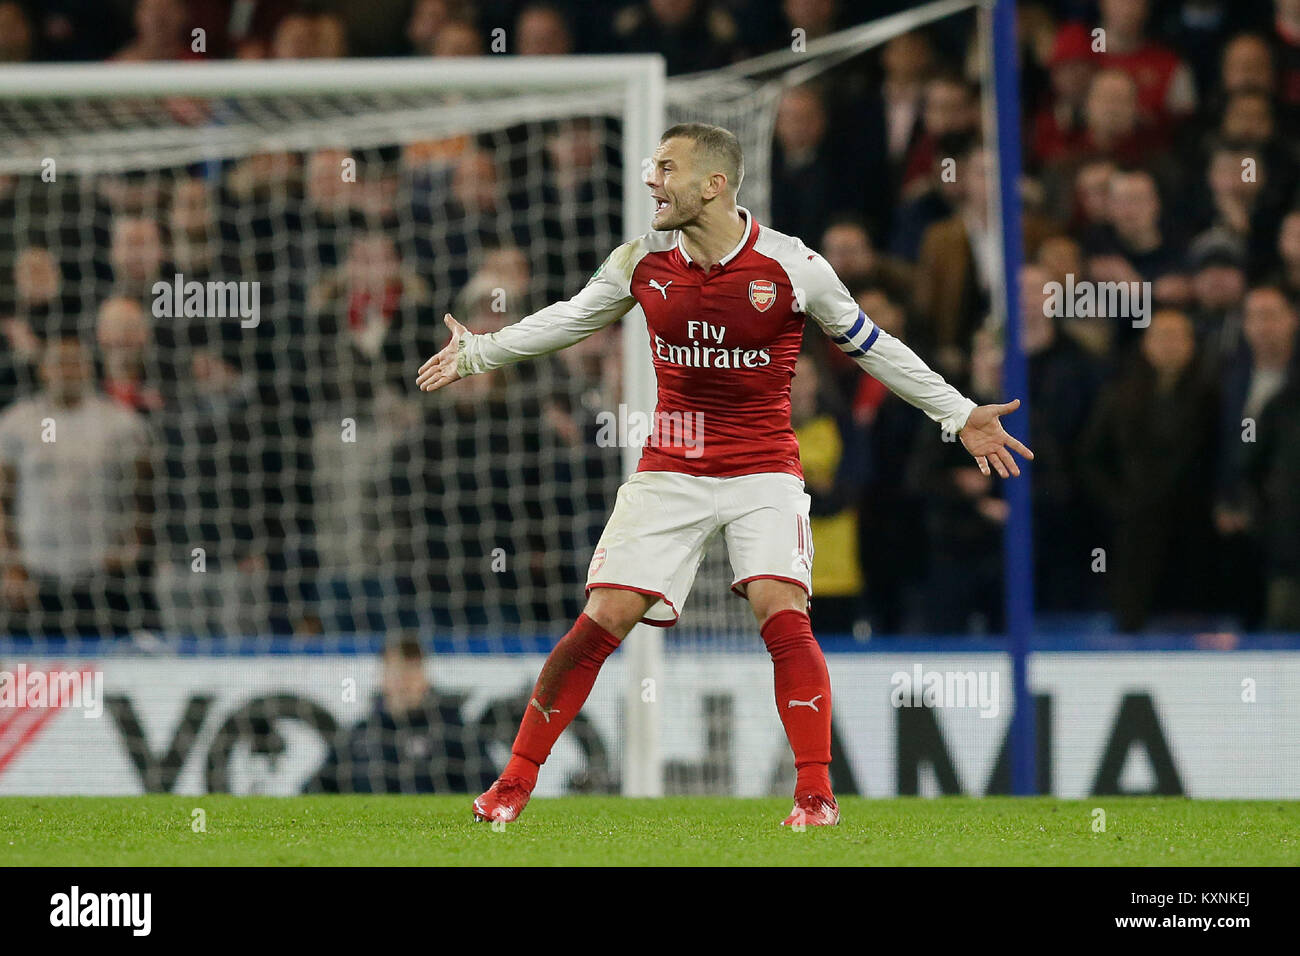 London, UK. 10th Jan, 2018. Arsenal's Jack Wilshere shouts in frustration during the English League Cup semi-final 1st leg match between Chelsea and Arsenal at Stamford Bridge Stadium in London, Britain on Jan. 10, 2018. Chelsea and Arsenal drew 0-0. Credit: Tim Ireland/Xinhua/Alamy Live News Stock Photo